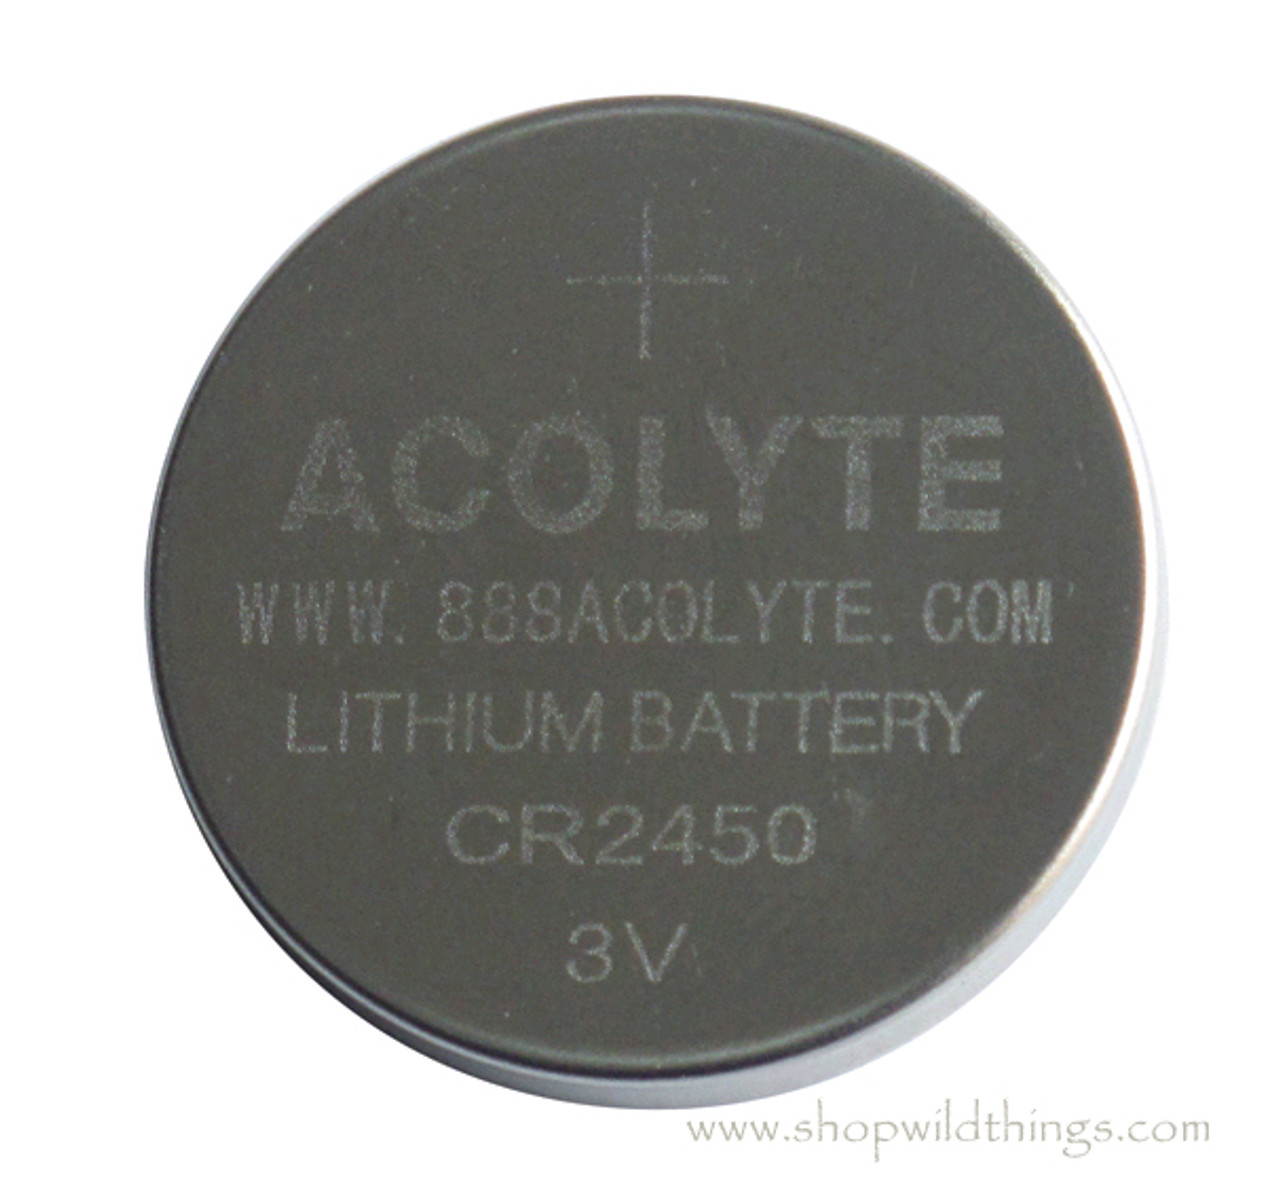 https://cdn11.bigcommerce.com/s-x1vm6a4952/images/stencil/1280x1280/products/7224/21514/acolyte-cr2450-3v-lithium-coin-batteries-4-pack-for-sumix-46__00641.1646342002.jpg?c=2